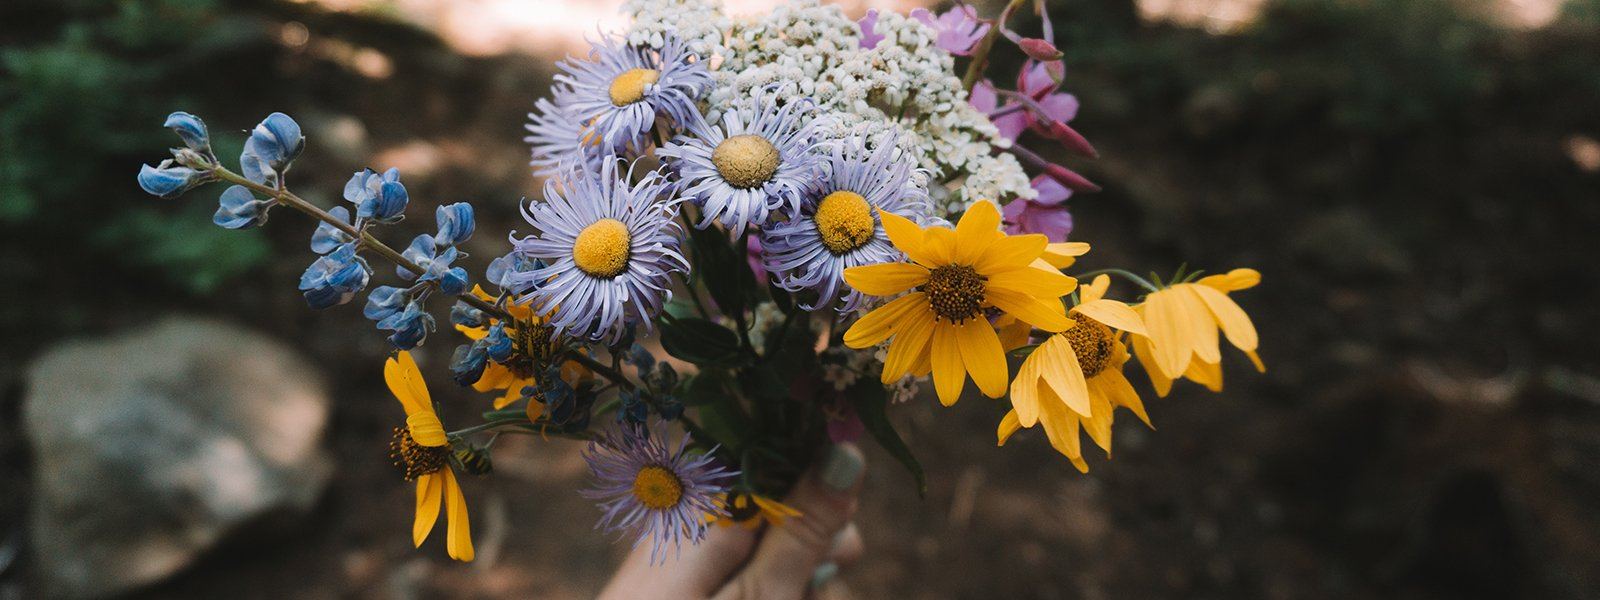 5 Ways to Work Wildflowers Into Your Summer Baby Shower